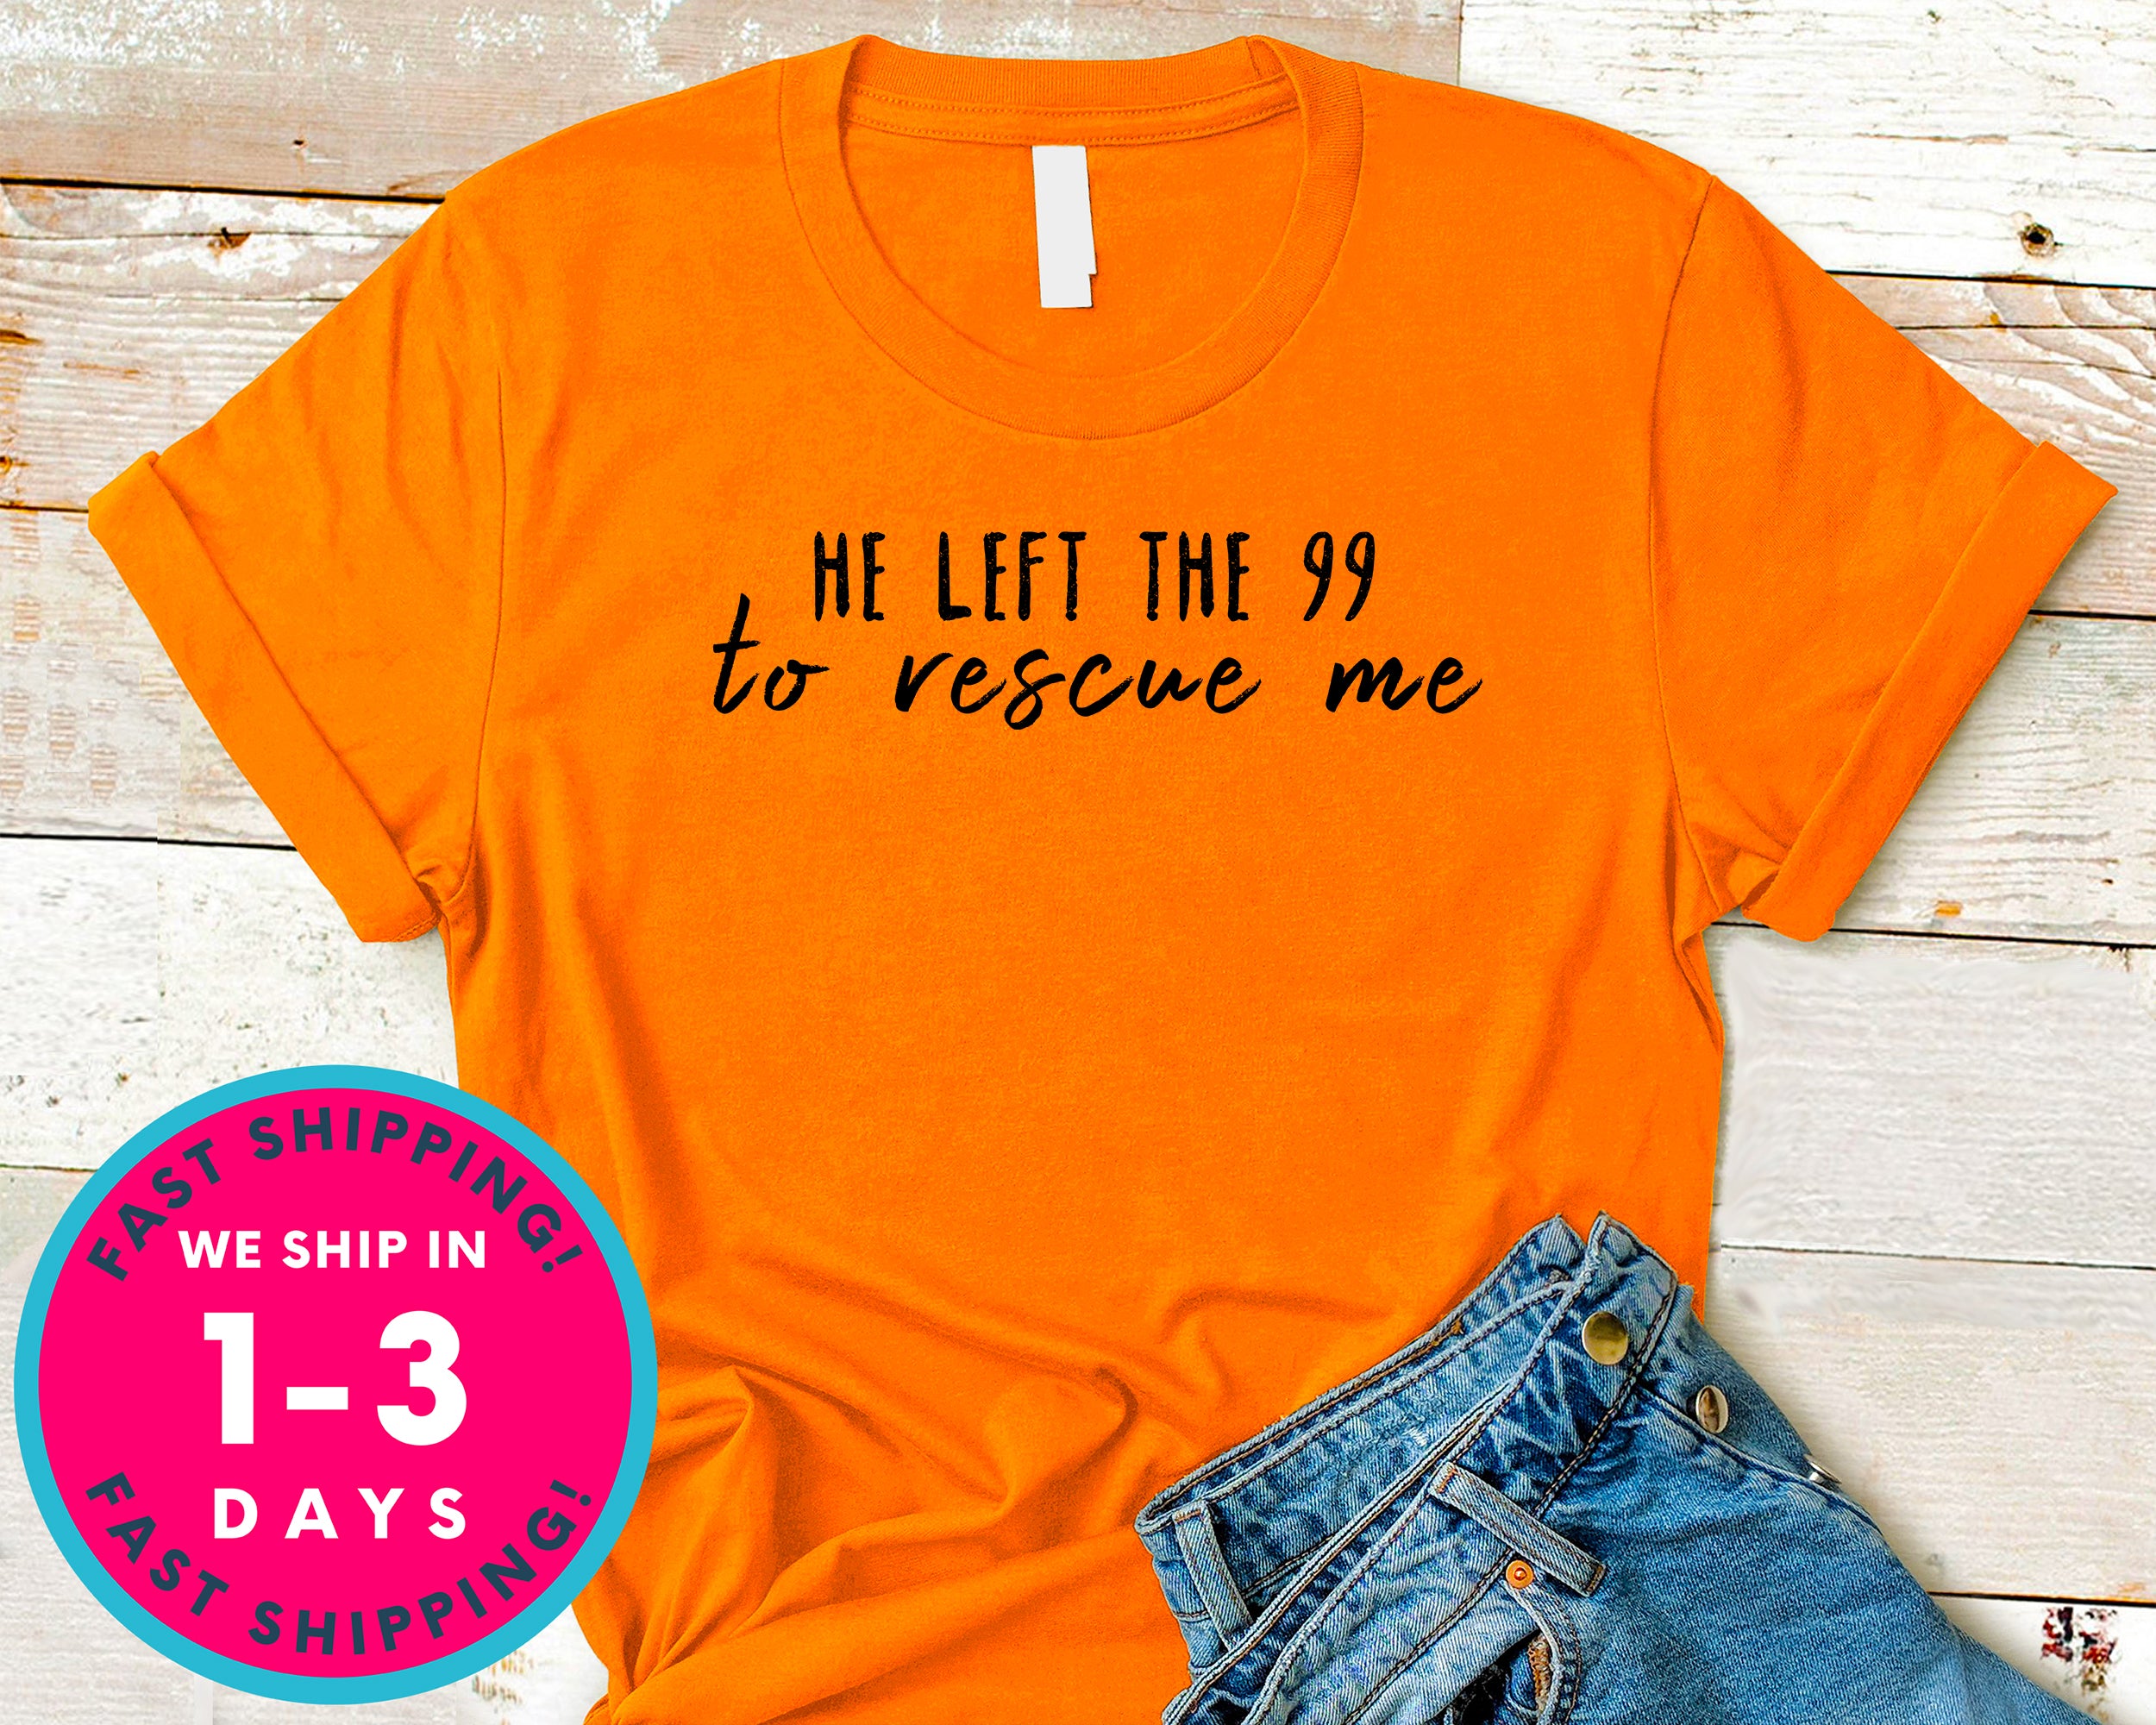 He Left The 99 To Rescue Me T-Shirt - Inspirational Quotes Saying Shirt